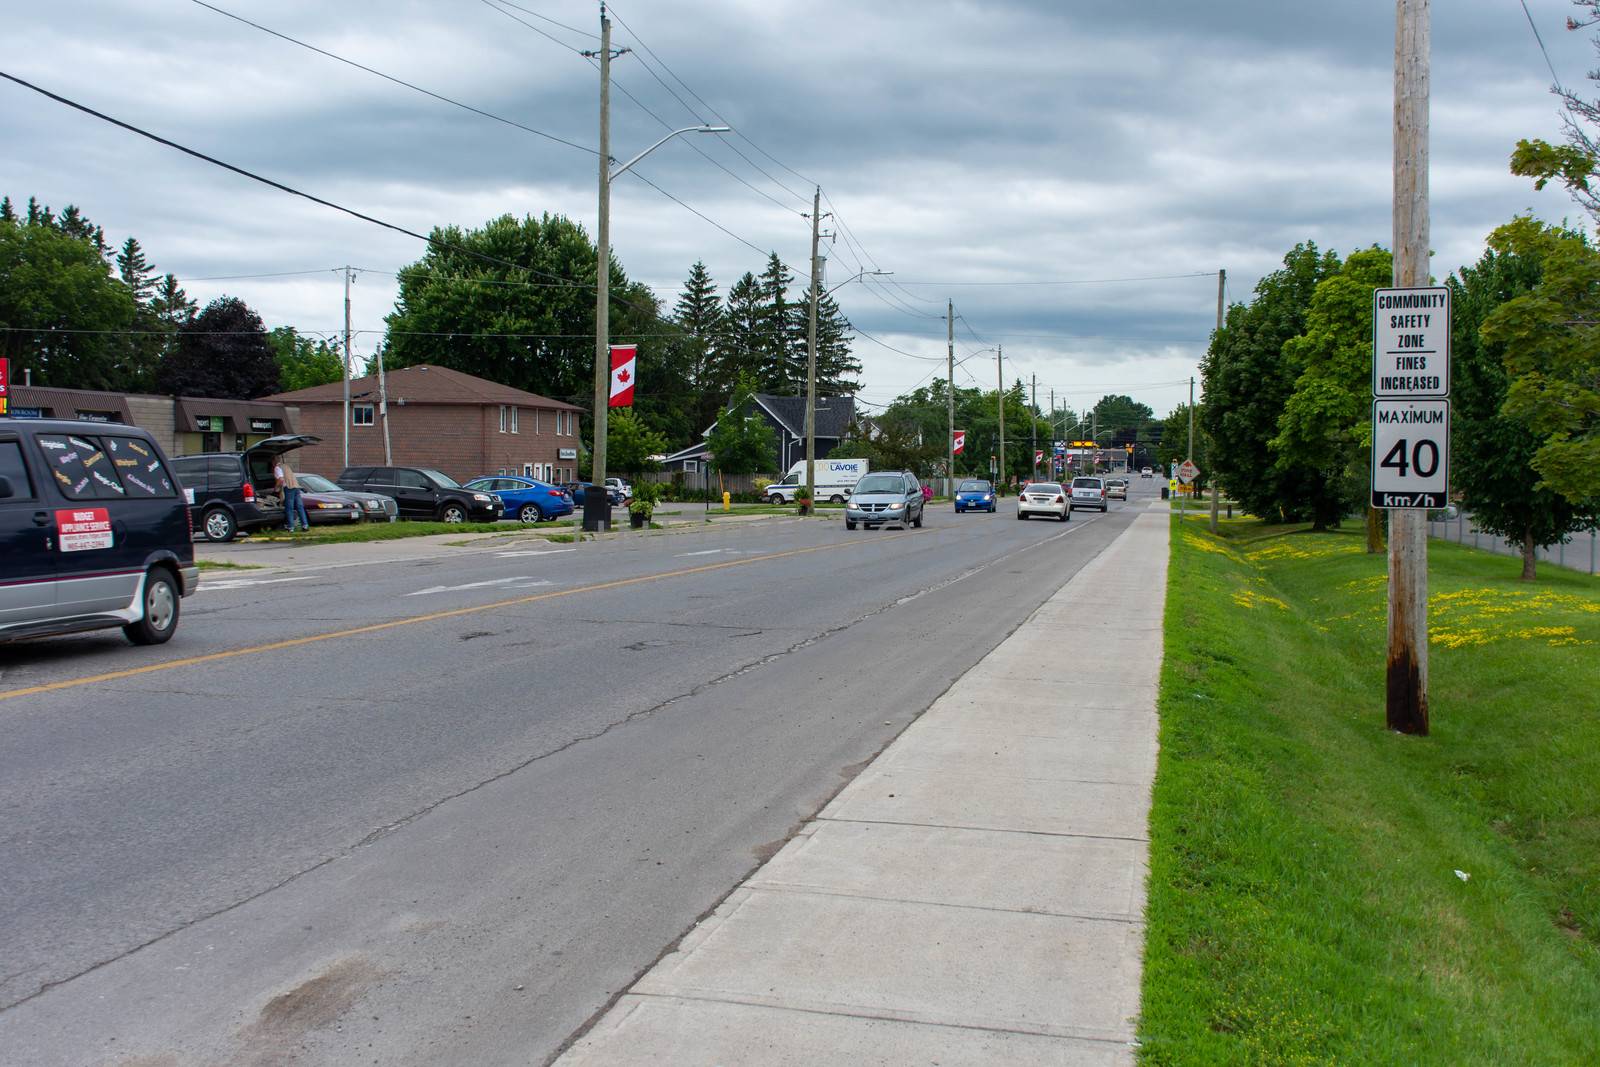 "Brighton, Ontario/Canada - 07/22/2019: Downtown rural sreet of small town Canadian city of Brighton near Pesquile Lake Provincial Park in the summer cloudy and sunny day."